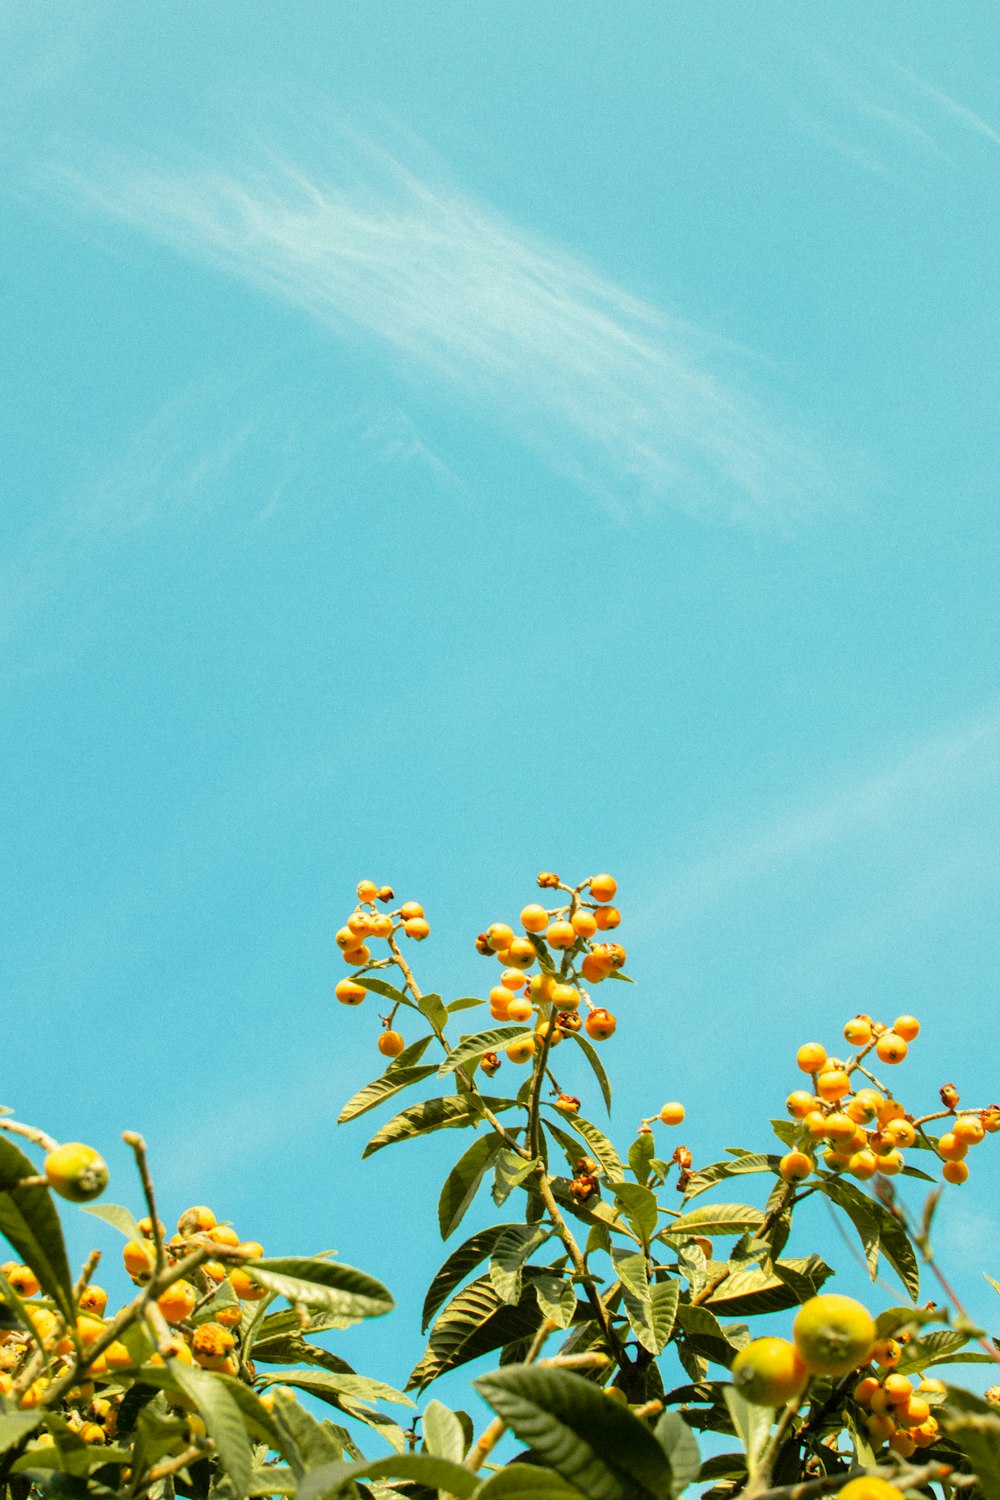 a blue sky with some yellow flowers in the foreground